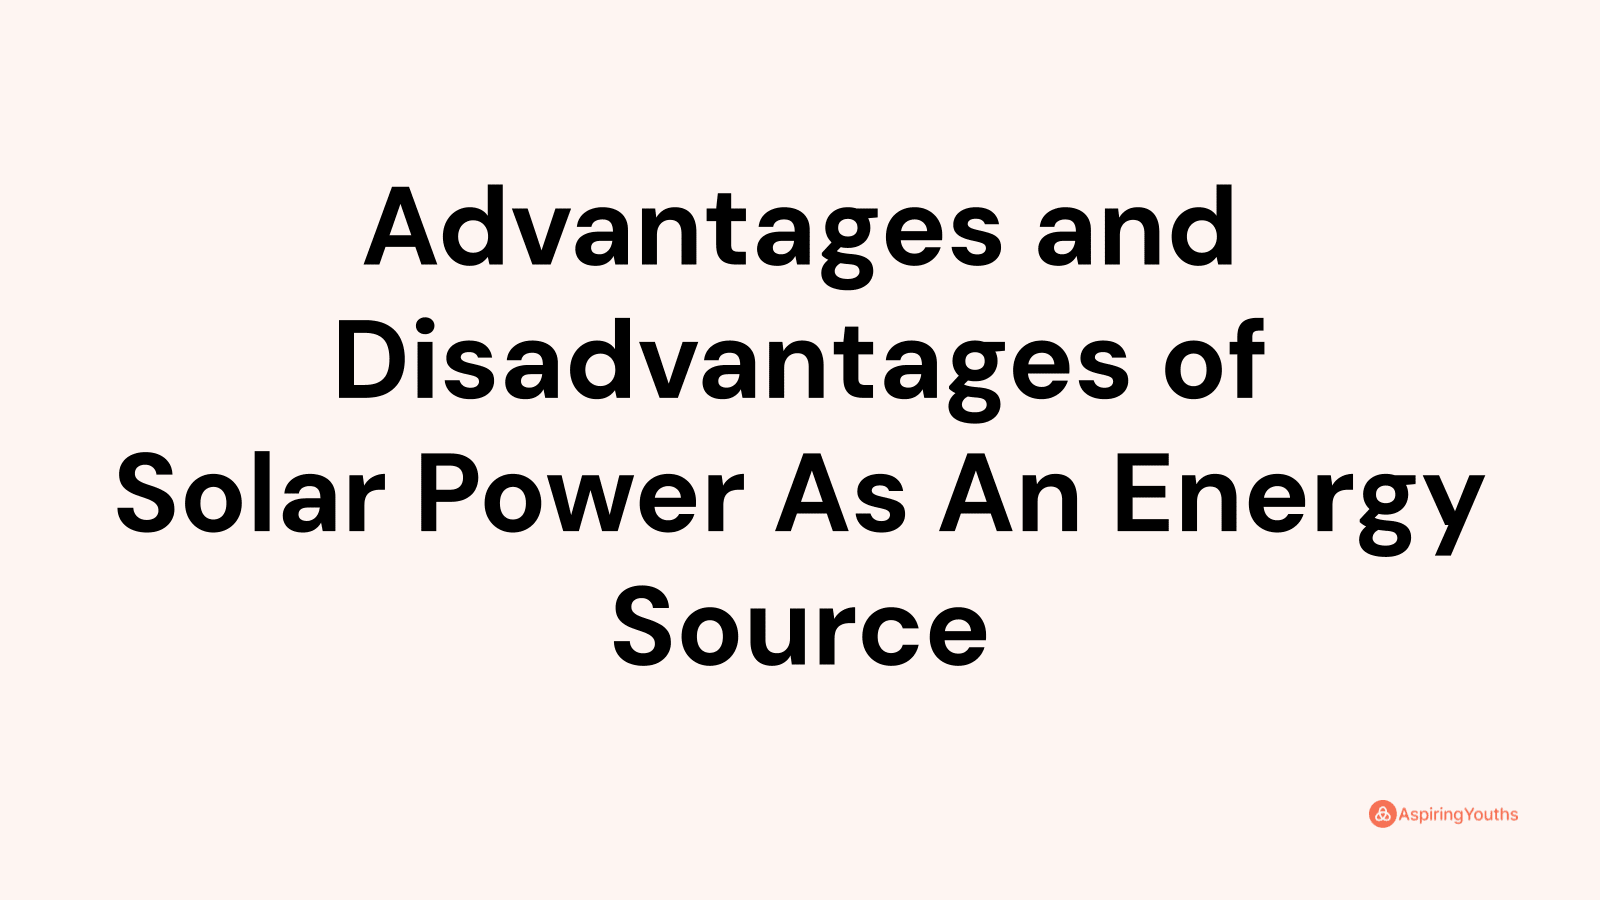 Advantages and disadvantages of Solar Power As An Energy Source